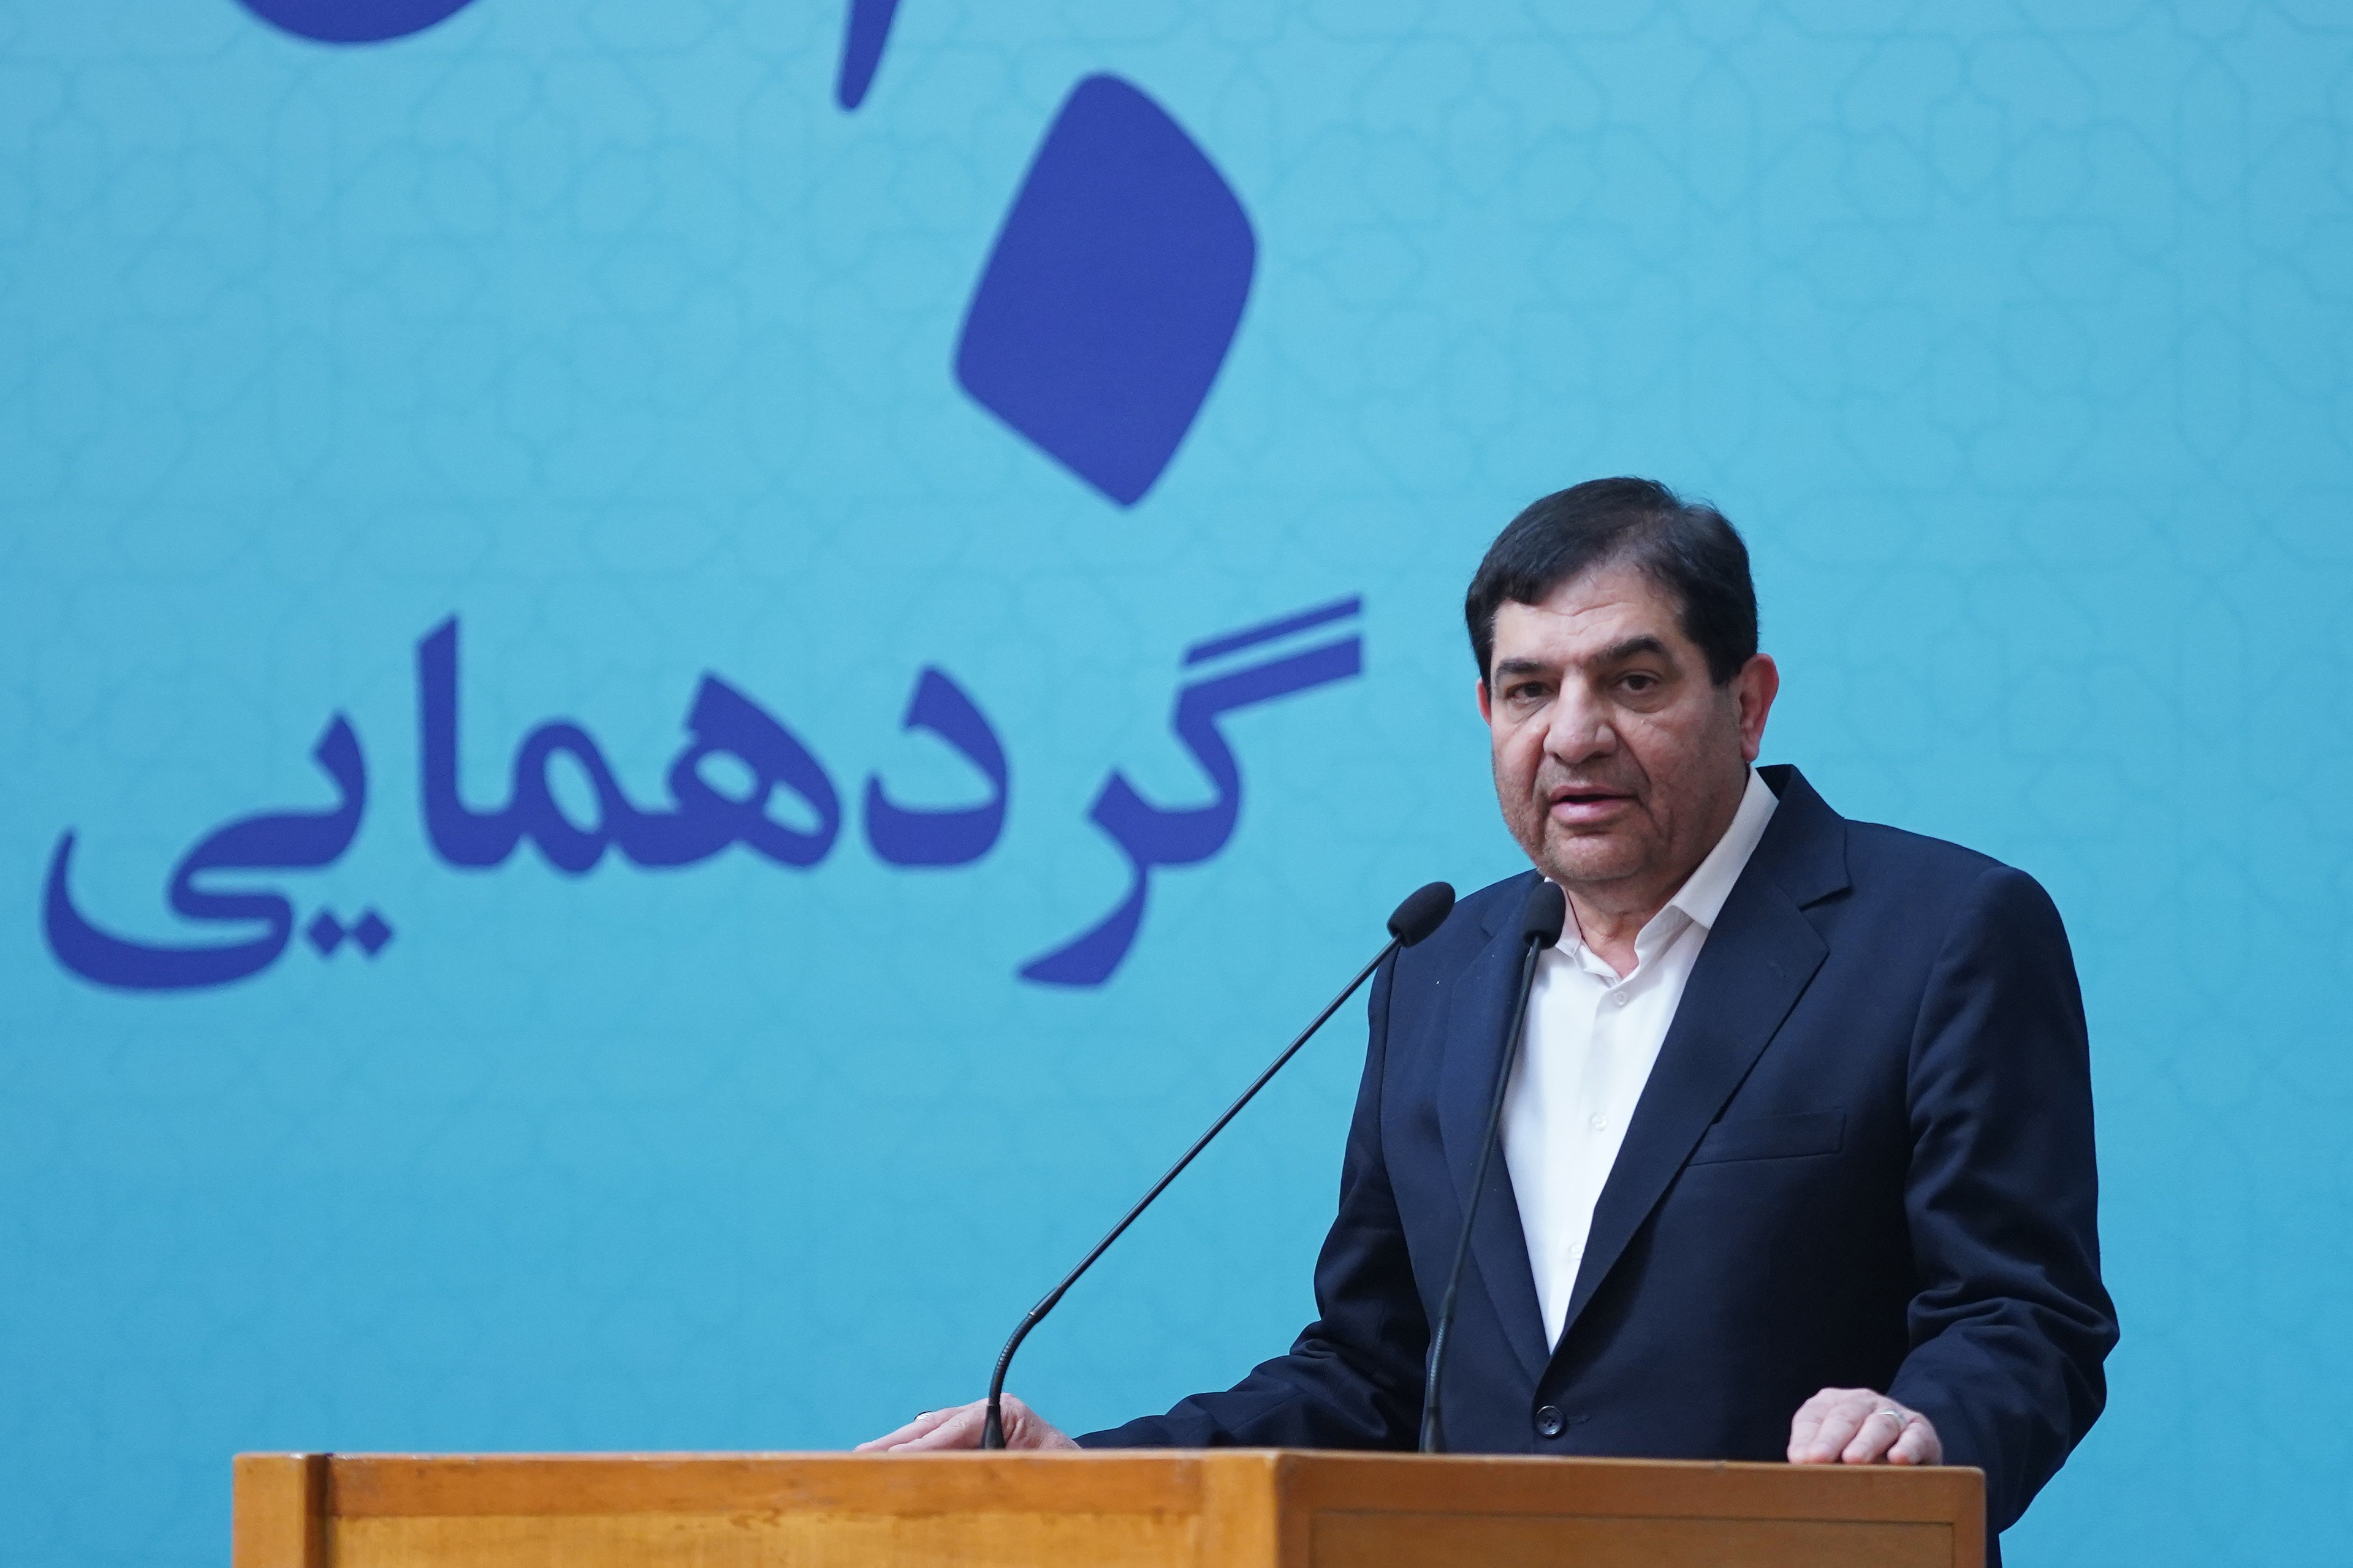 Mohammad Mokhber first vice president of Iran speaks during a meeting at the Ejlas hall in Tehran, Iran on March 27, 2023.